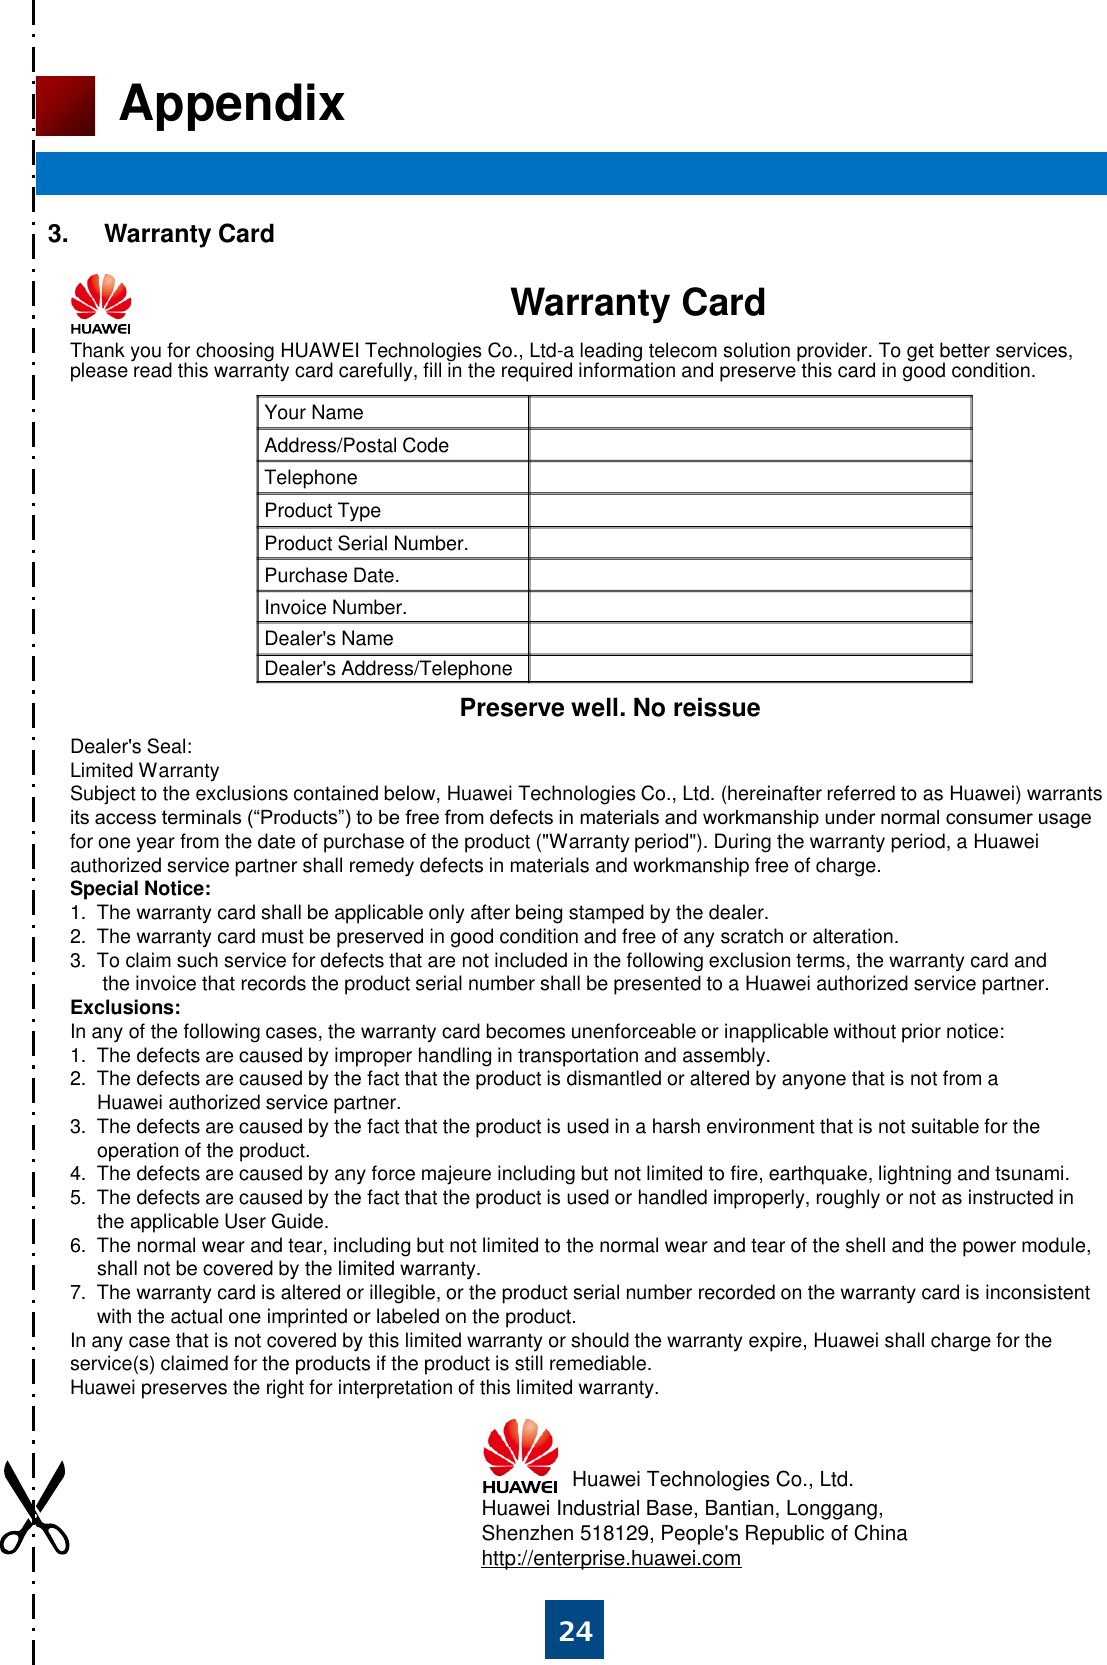 24 Appendix 3. Warranty Card                                              Warranty Card Thank you for choosing HUAWEI Technologies Co., Ltd-a leading telecom solution provider. To get better services, please read this warranty card carefully, fill in the required information and preserve this card in good condition. Dealer&apos;s Seal: Limited Warranty Subject to the exclusions contained below, Huawei Technologies Co., Ltd. (hereinafter referred to as Huawei) warrants its access terminals (“Products”) to be free from defects in materials and workmanship under normal consumer usage for one year from the date of purchase of the product (&quot;Warranty period&quot;). During the warranty period, a Huawei authorized service partner shall remedy defects in materials and workmanship free of charge. Special Notice: 1.  The warranty card shall be applicable only after being stamped by the dealer. 2.  The warranty card must be preserved in good condition and free of any scratch or alteration. 3.  To claim such service for defects that are not included in the following exclusion terms, the warranty card and        the invoice that records the product serial number shall be presented to a Huawei authorized service partner. Exclusions: In any of the following cases, the warranty card becomes unenforceable or inapplicable without prior notice: 1.  The defects are caused by improper handling in transportation and assembly. 2.  The defects are caused by the fact that the product is dismantled or altered by anyone that is not from a      Huawei authorized service partner. 3.  The defects are caused by the fact that the product is used in a harsh environment that is not suitable for the       operation of the product. 4.  The defects are caused by any force majeure including but not limited to fire, earthquake, lightning and tsunami. 5.  The defects are caused by the fact that the product is used or handled improperly, roughly or not as instructed in       the applicable User Guide. 6.  The normal wear and tear, including but not limited to the normal wear and tear of the shell and the power module,      shall not be covered by the limited warranty. 7.  The warranty card is altered or illegible, or the product serial number recorded on the warranty card is inconsistent       with the actual one imprinted or labeled on the product. In any case that is not covered by this limited warranty or should the warranty expire, Huawei shall charge for the service(s) claimed for the products if the product is still remediable.  Huawei preserves the right for interpretation of this limited warranty. Huawei Technologies Co., Ltd. Huawei Industrial Base, Bantian, Longgang, Shenzhen 518129, People&apos;s Republic of China http://enterprise.huawei.com Your Name Address/Postal Code Telephone Product Type Product Serial Number. Purchase Date. Invoice Number. Dealer&apos;s Name Dealer&apos;s Address/Telephone Preserve well. No reissue 